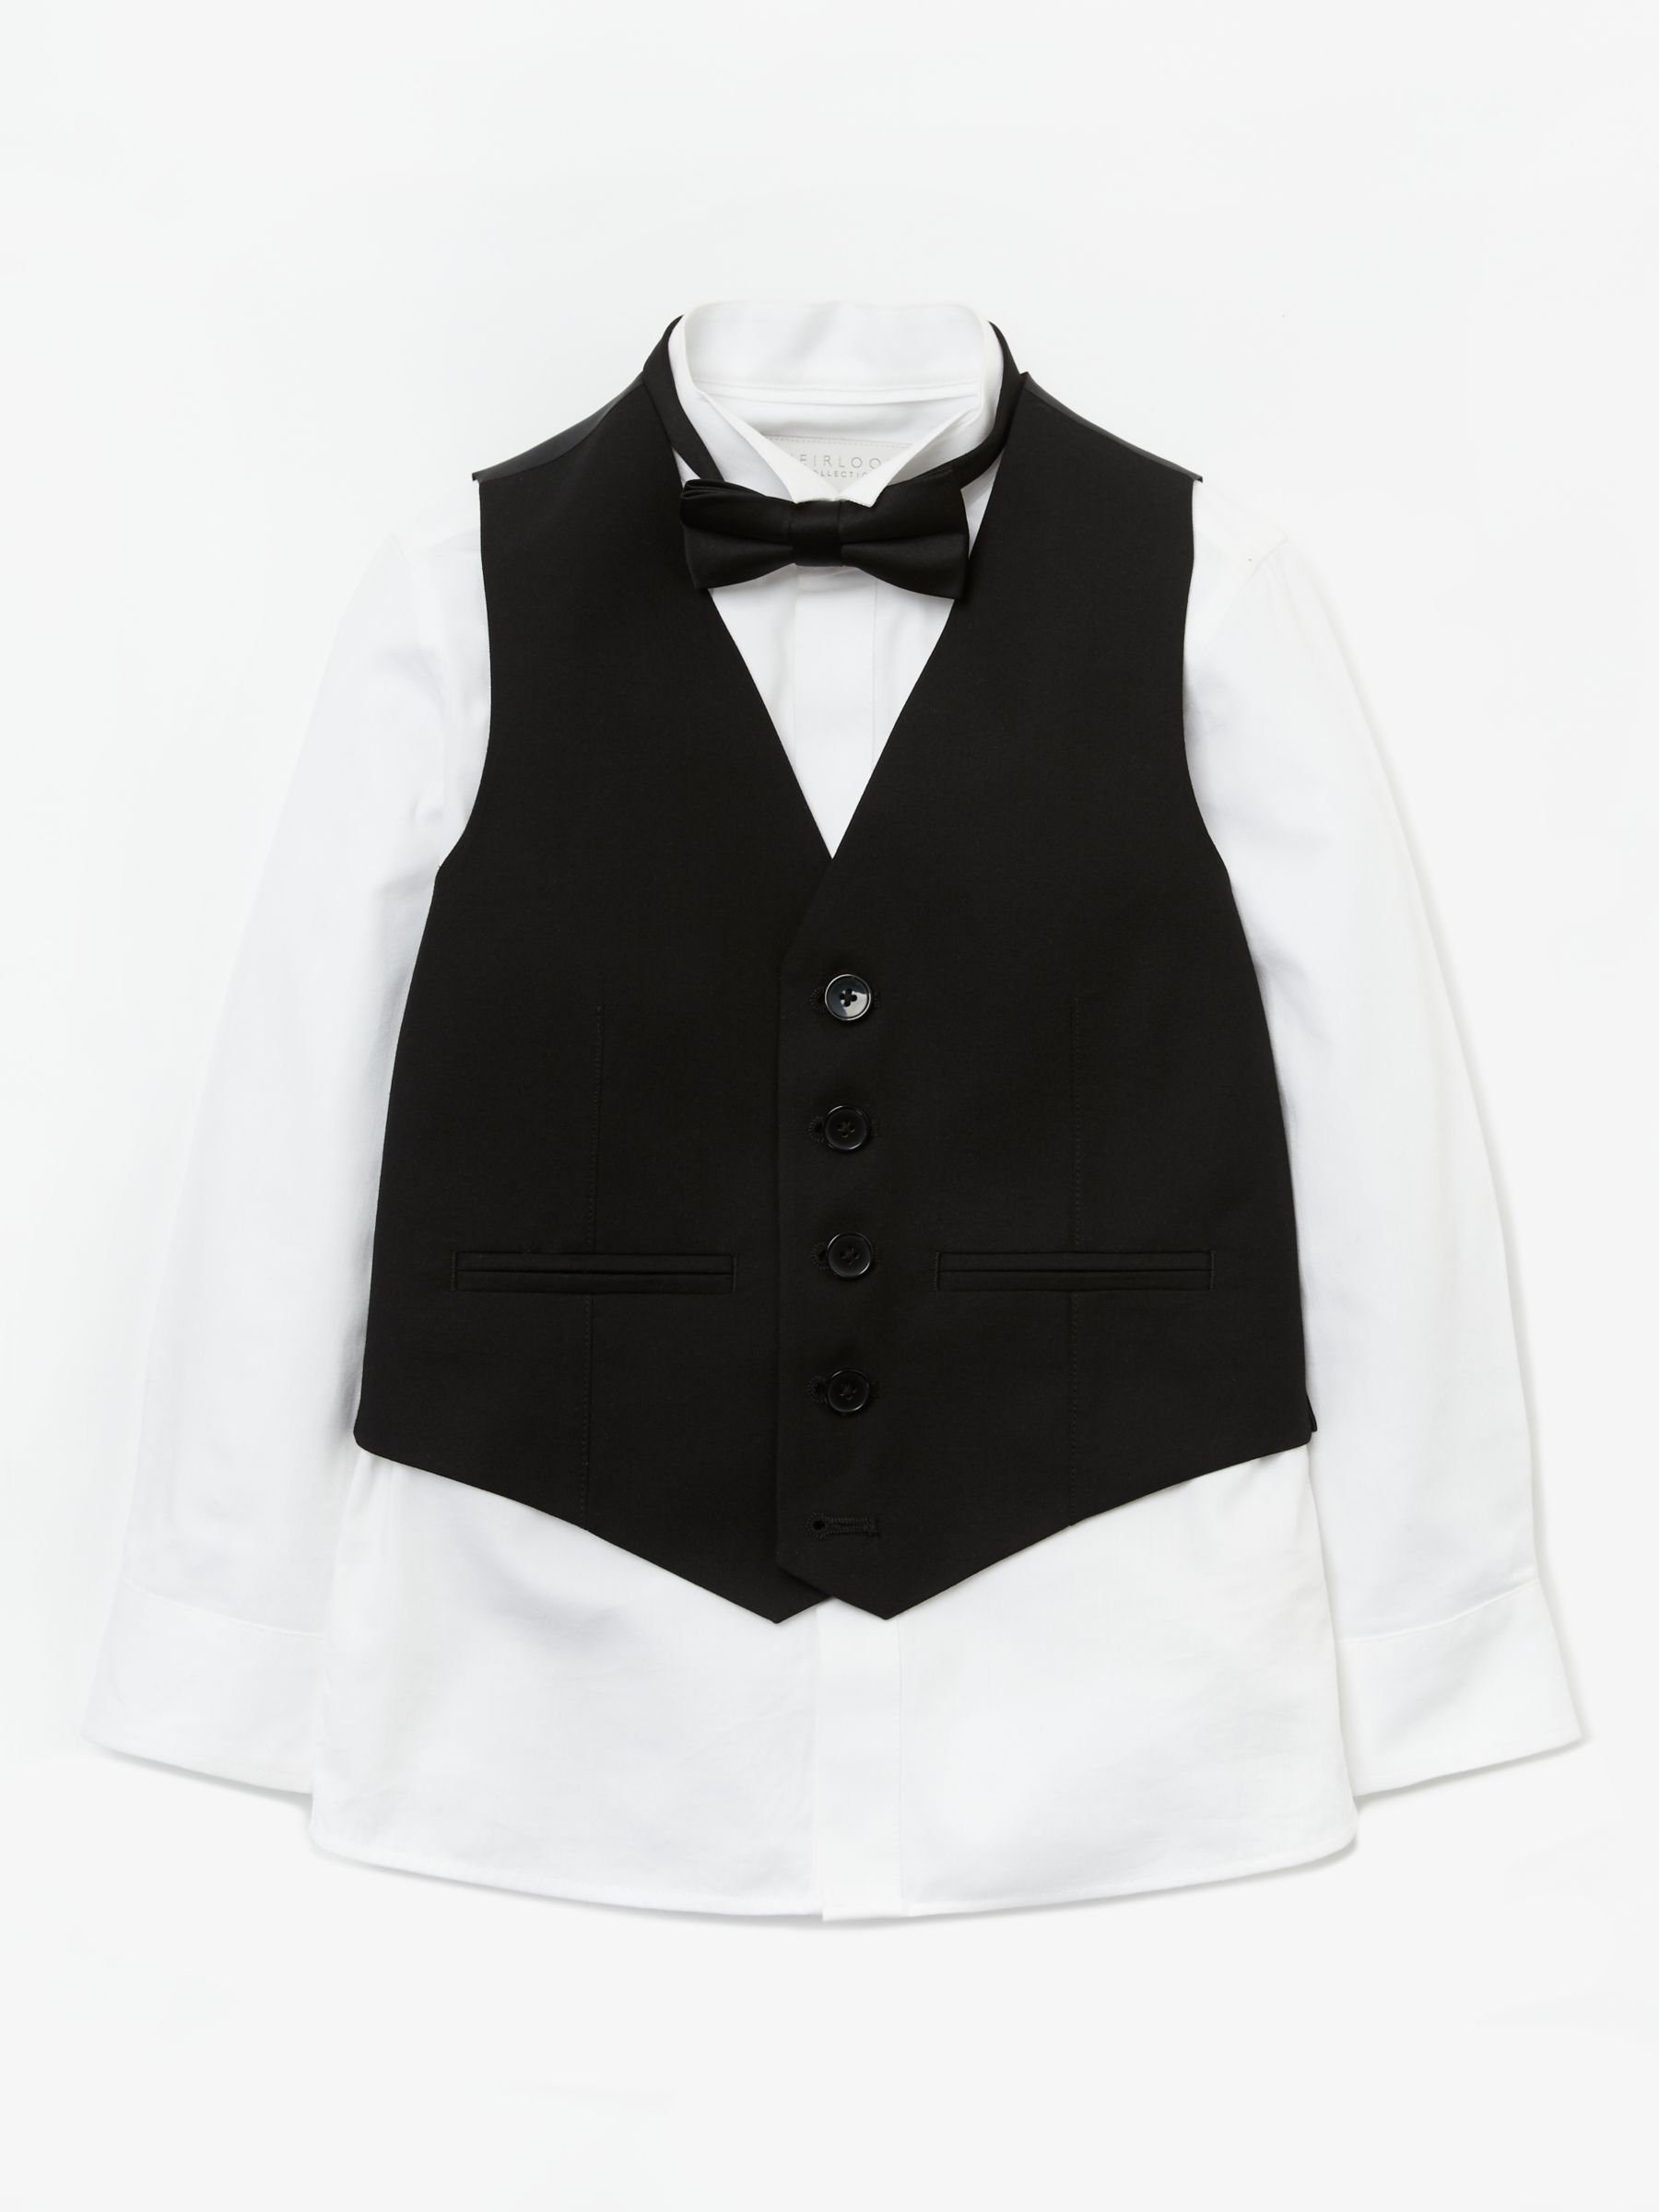 John Lewis & Partners Heirloom Collection Boys' Waistcoat, Bow Tie And Shirt Set, Black